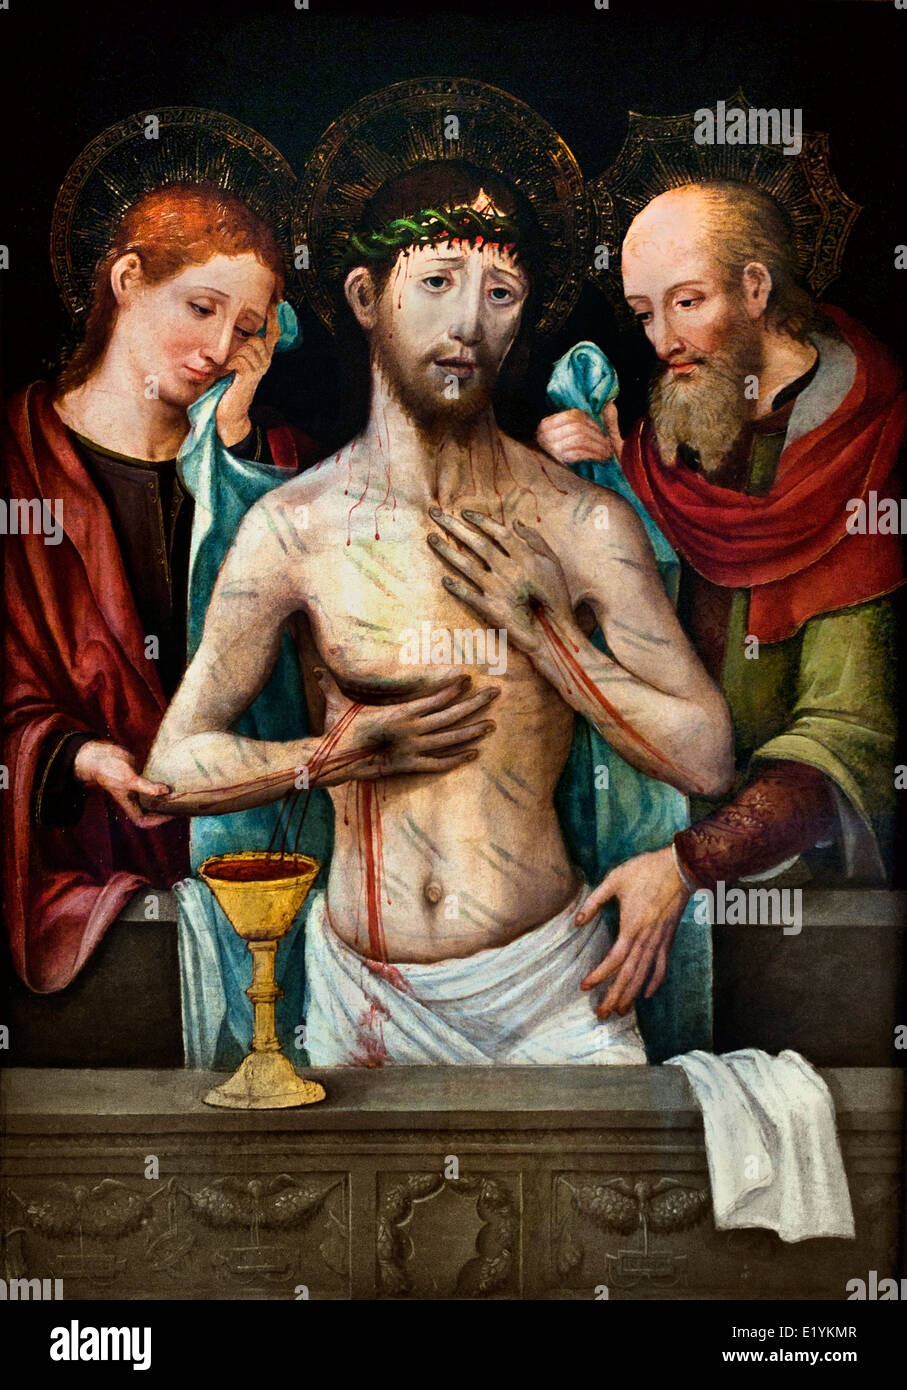 Patient Christ with St. John the Evangelist Joseph of Arimathea by Vicent Macip 1475-1550 Medieval Gothic Art Spain Spanish Stock Photo